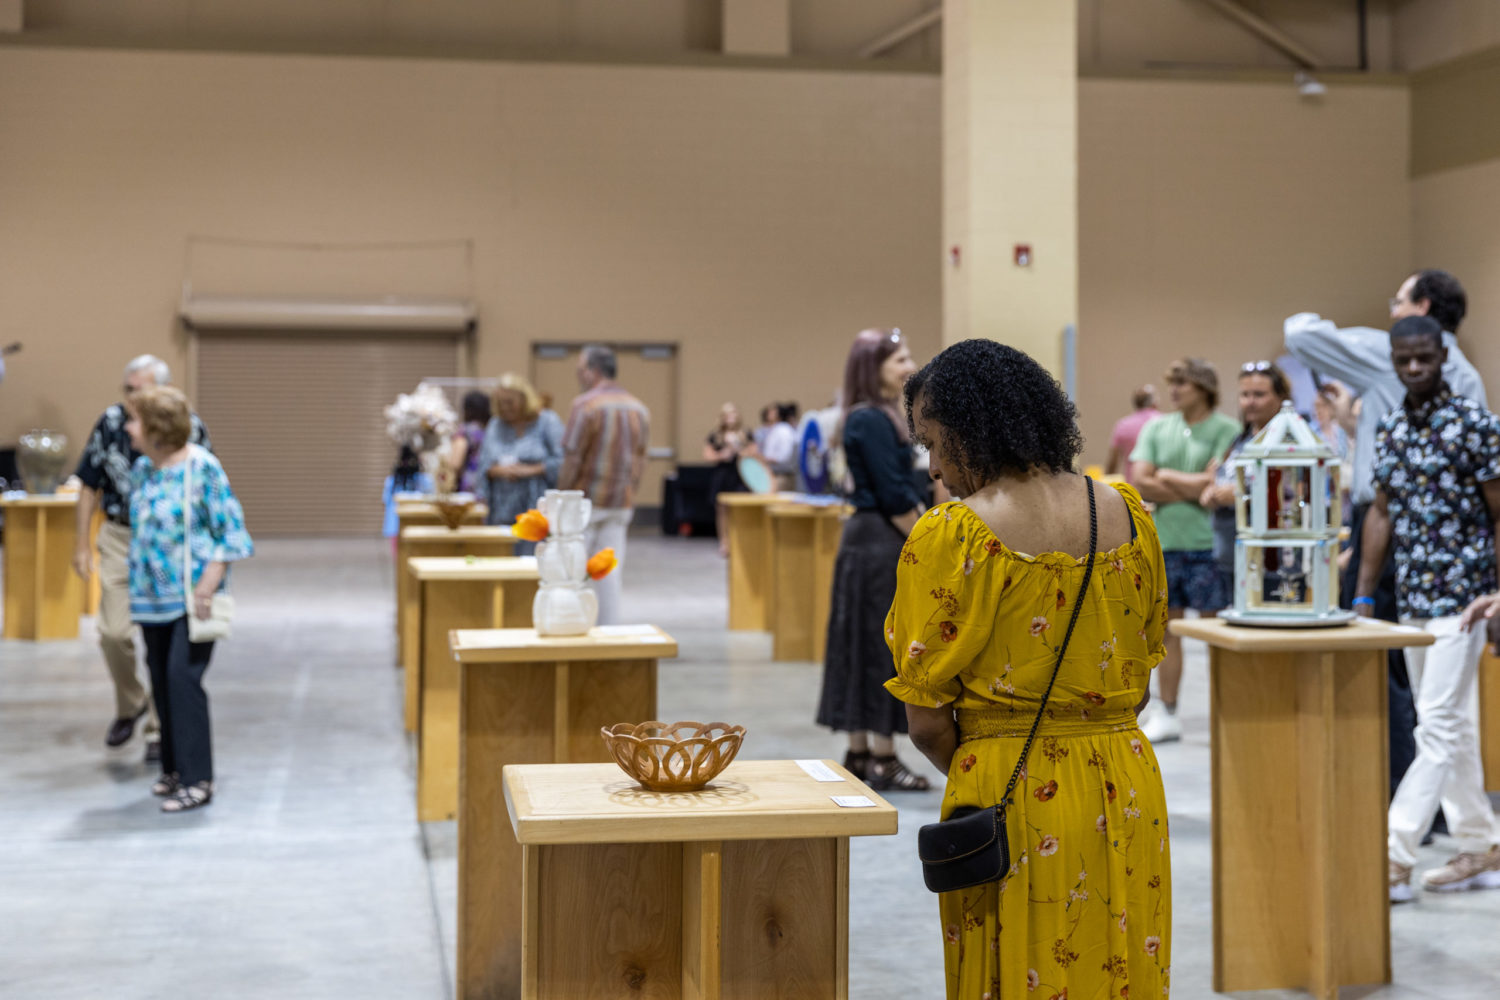 Visitors to North Charleston Arts Fest browse entries displayed on tables at Palmetto Hands in an indoor exhibition hall